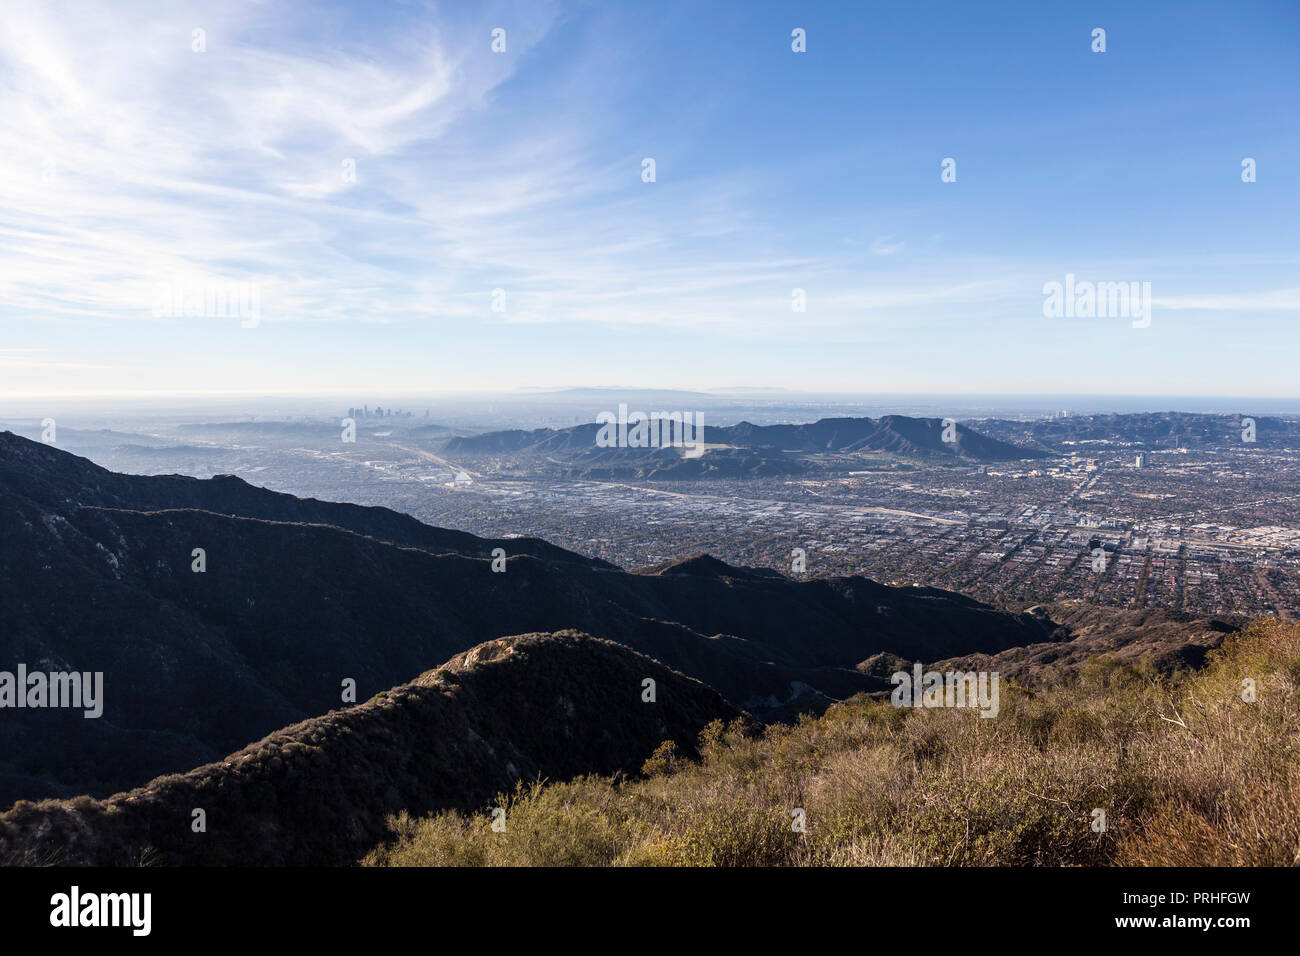 Morning Verdugo mountain view of Burbank, Griffith Park and Los Angeles in Southern California. Stock Photo